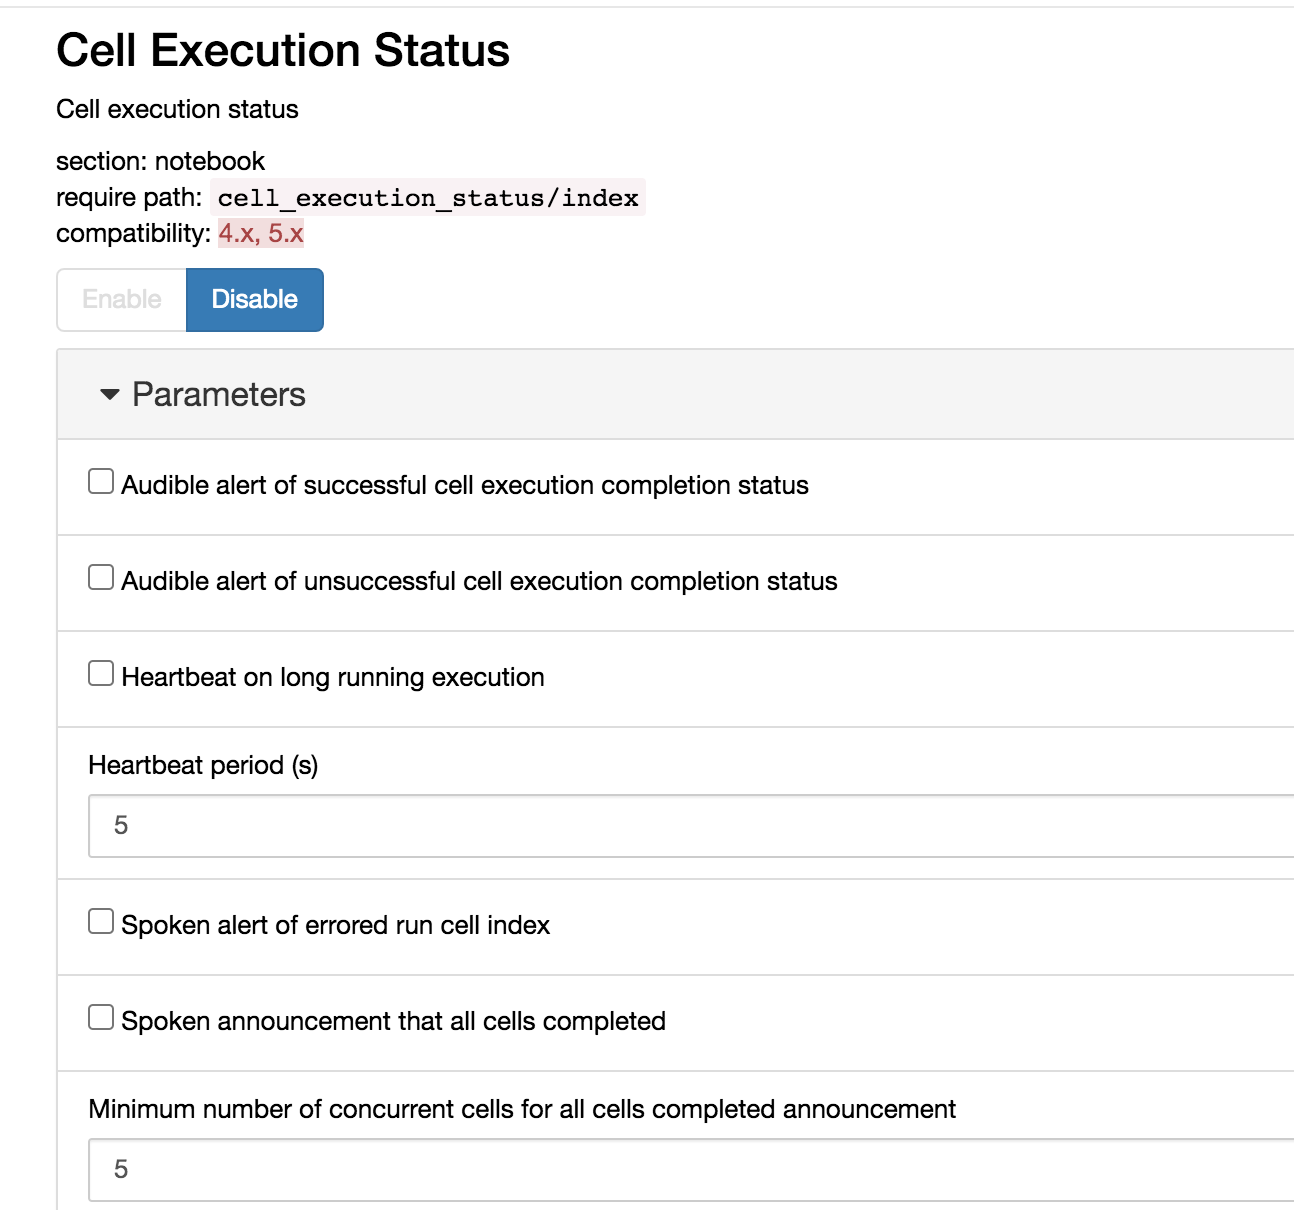 Screenshot showing the cell execution status configuration options, as listed in main text below this image.